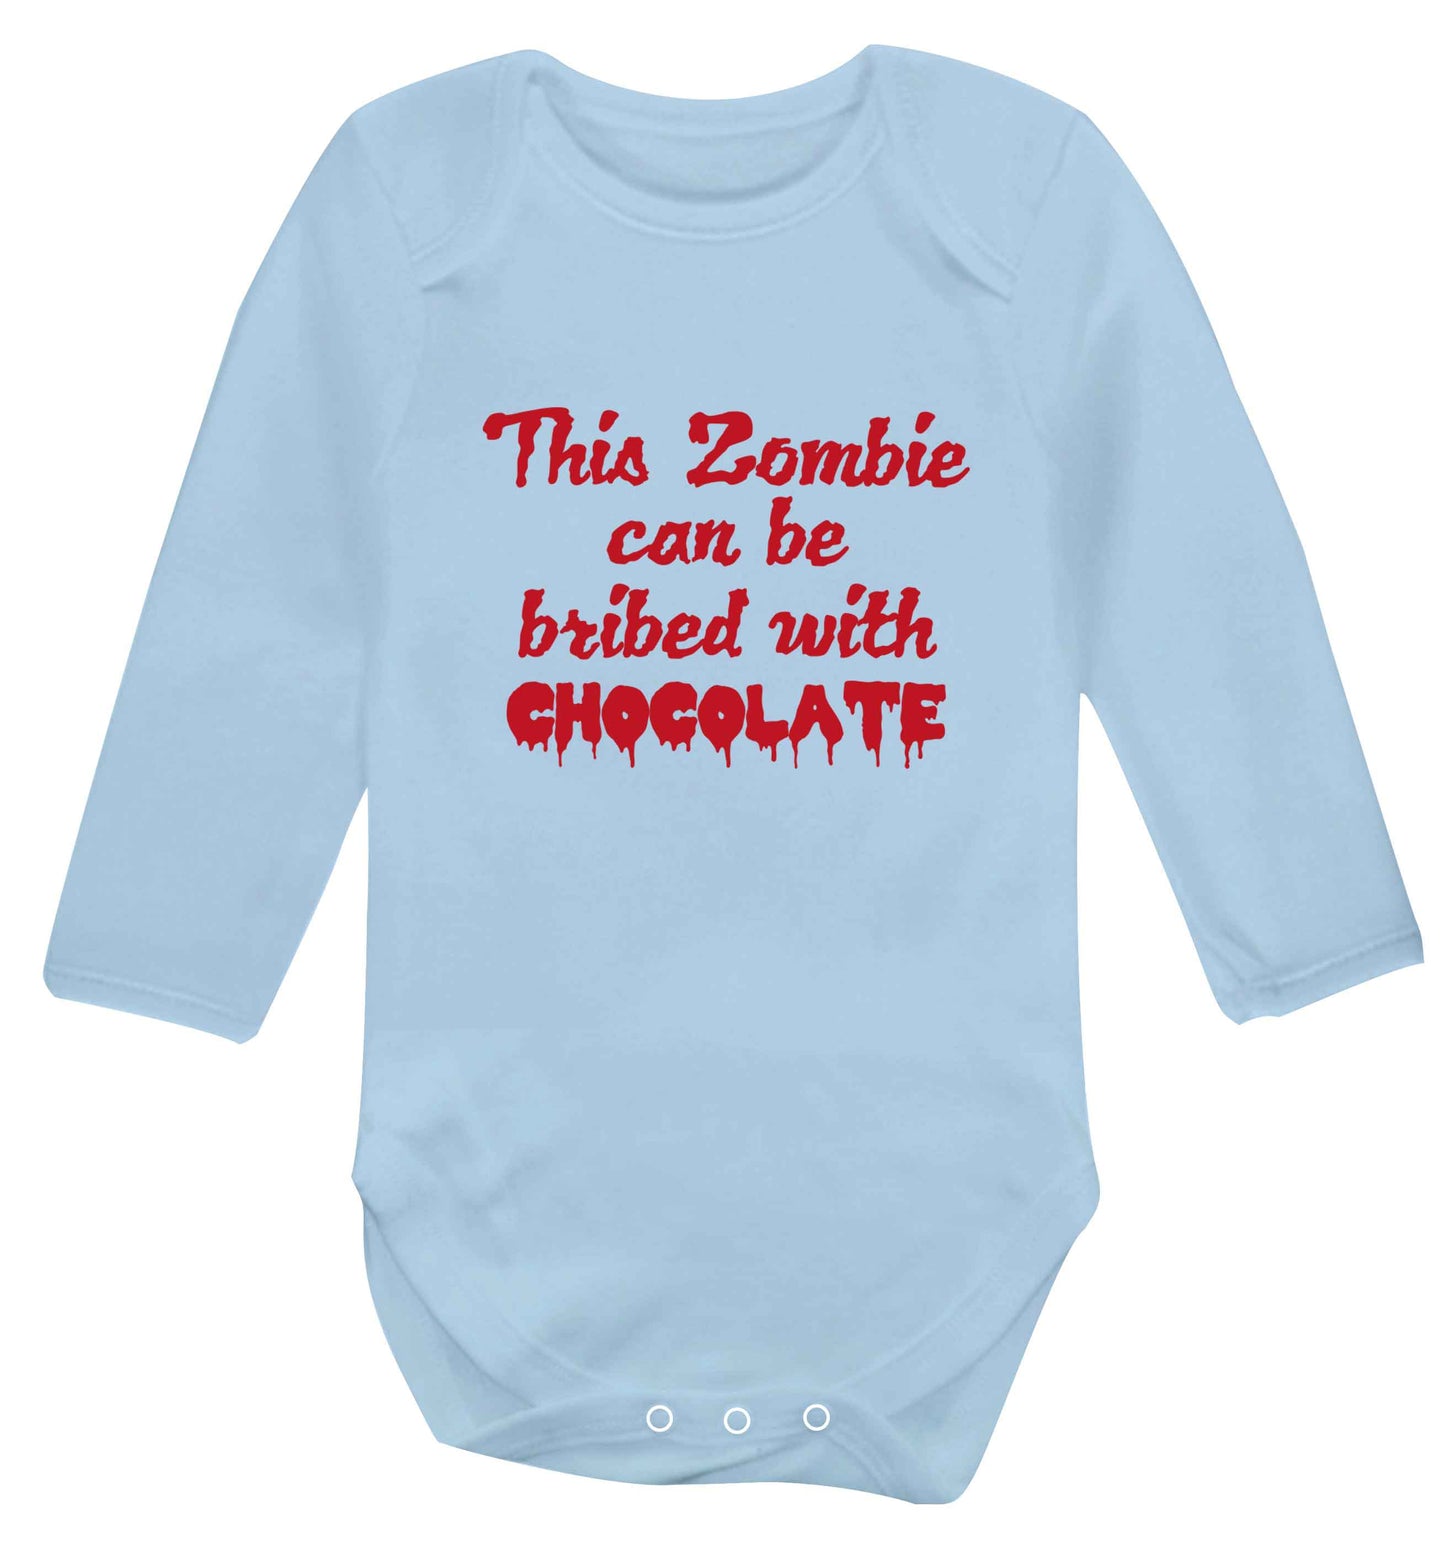 This zombie can be bribed with chocolate baby vest long sleeved pale blue 6-12 months